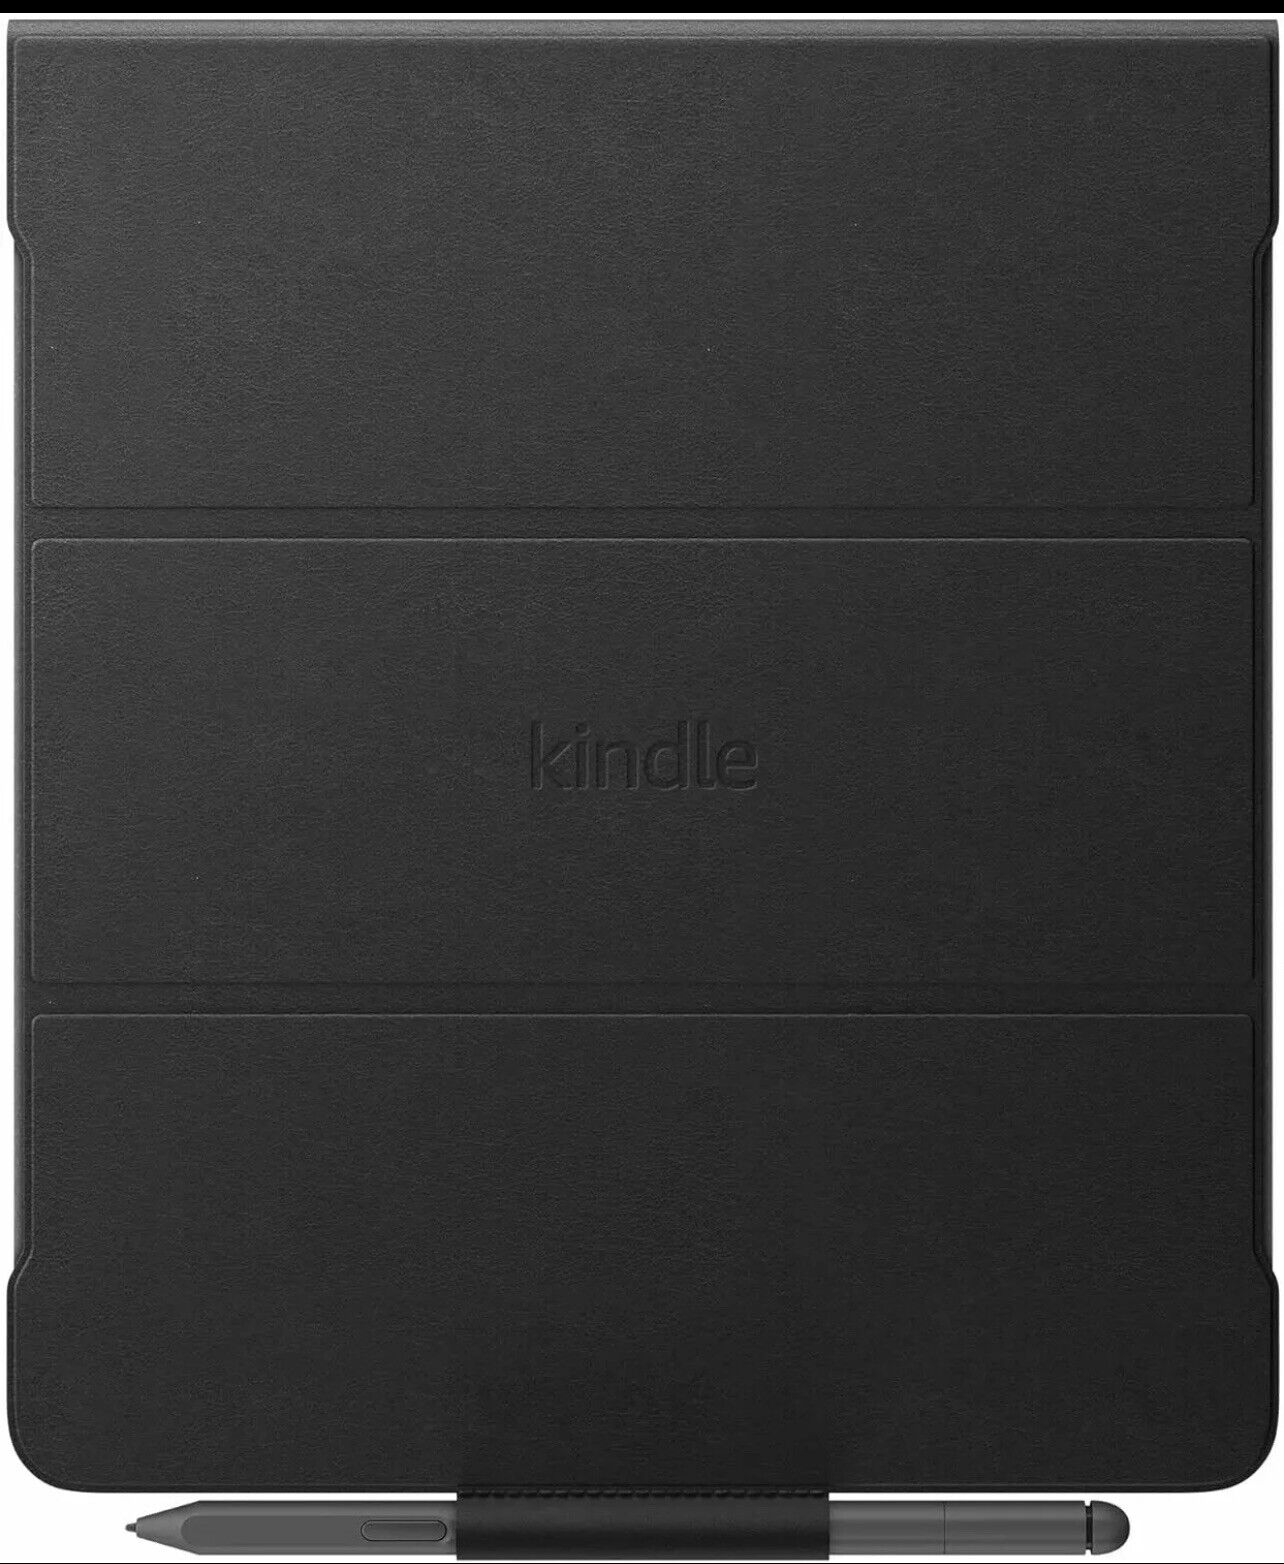 Amazon Kindle Scribe Leather Folio Cover Magnetic Attach Sleek Case Black